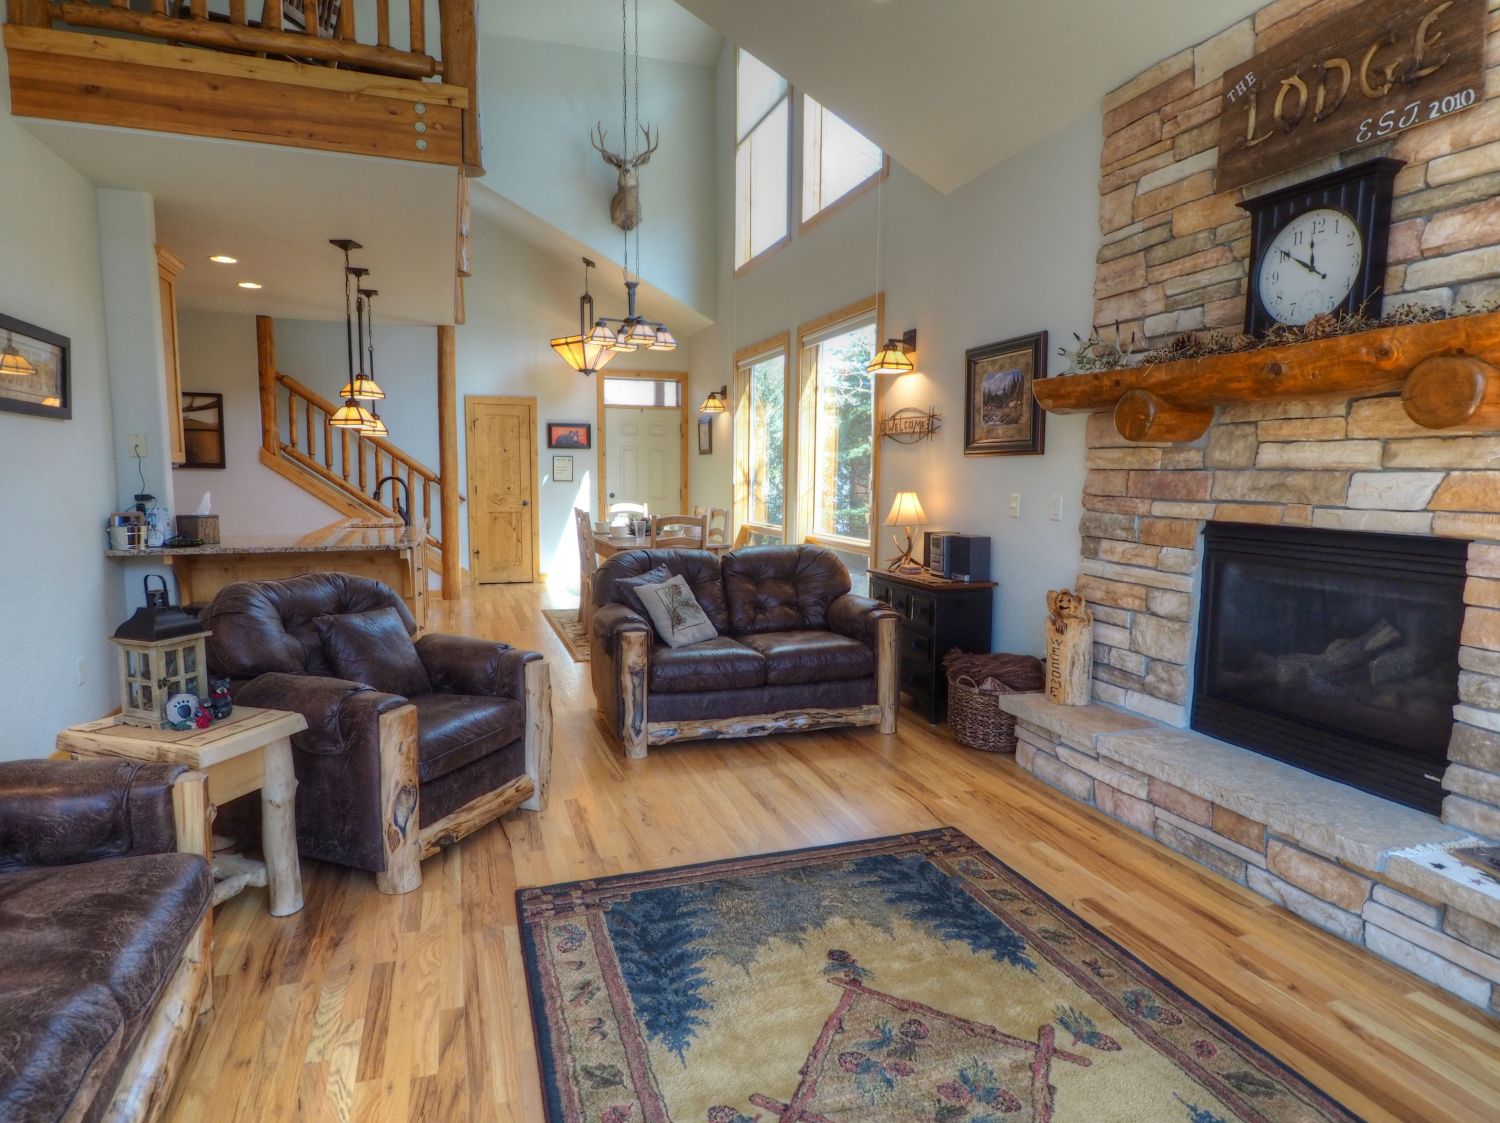 Rambling River Condo - Open concept mountain lodge living, dining and kitchen with soaring cathedral ceiling